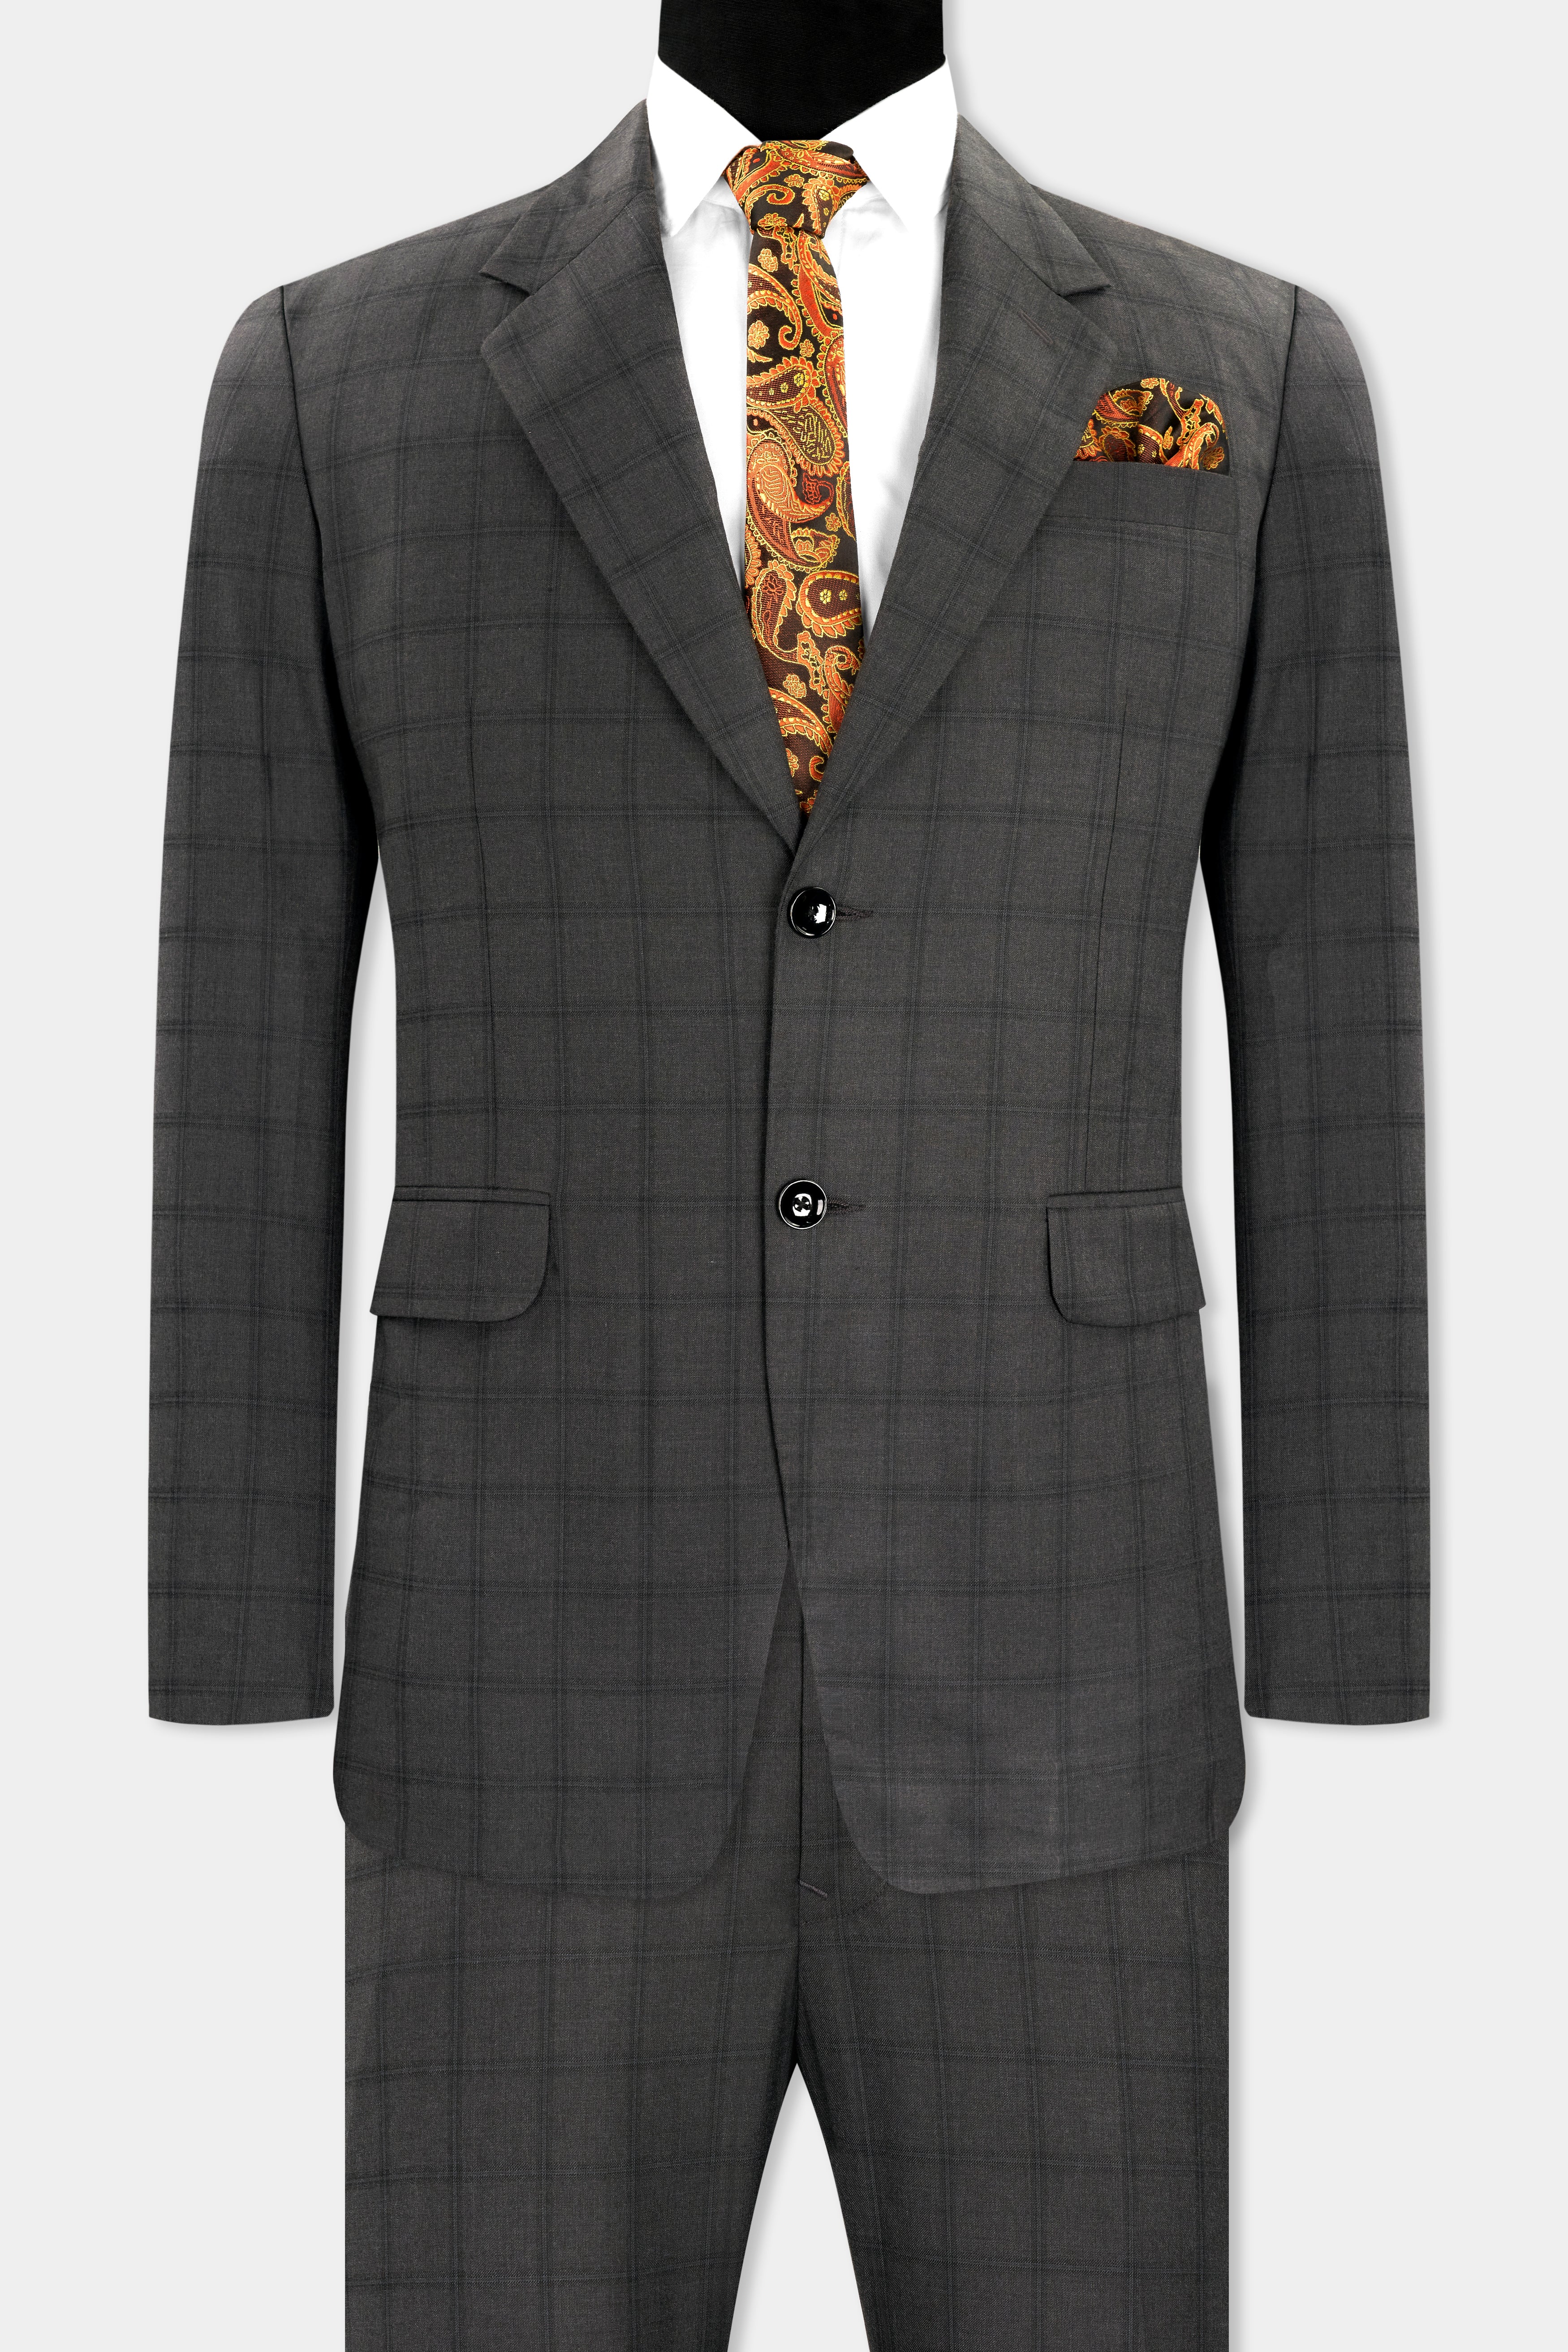 Chicago Gray Checkered Wool Rich Single Breasted Suit ST2741-SB-36,ST2741-SB-38,ST2741-SB-40,ST2741-SB-42,ST2741-SB-44,ST2741-SB-46,ST2741-SB-48,ST2741-SB-50,ST2741-SB-52,ST2741-SB-54,ST2741-SB-56,ST2741-SB-58,ST2741-SB-60